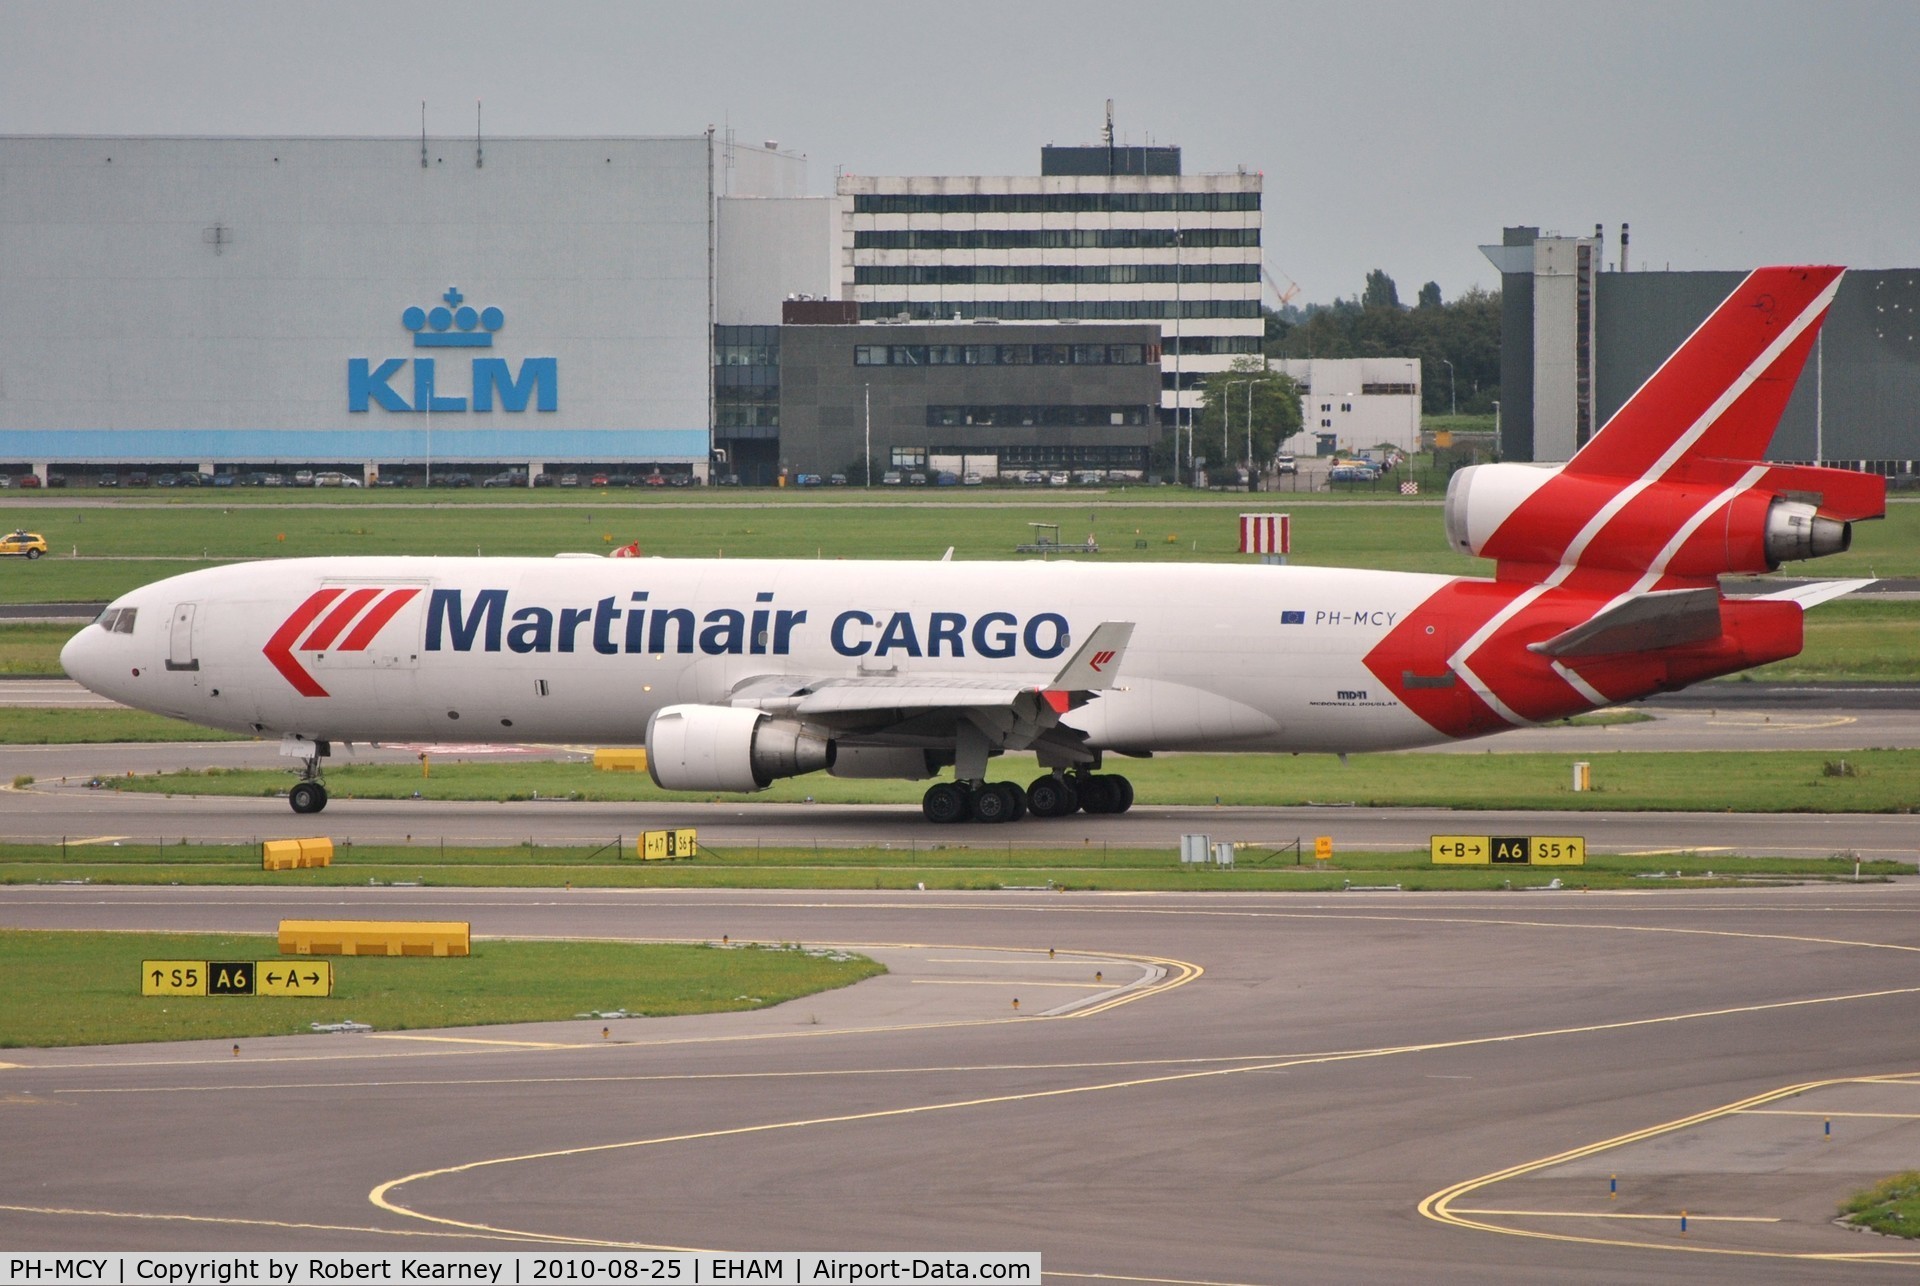 PH-MCY, 1991 McDonnell Douglas MD-11F C/N 48445, Martinair Cargo taxiing for take-off